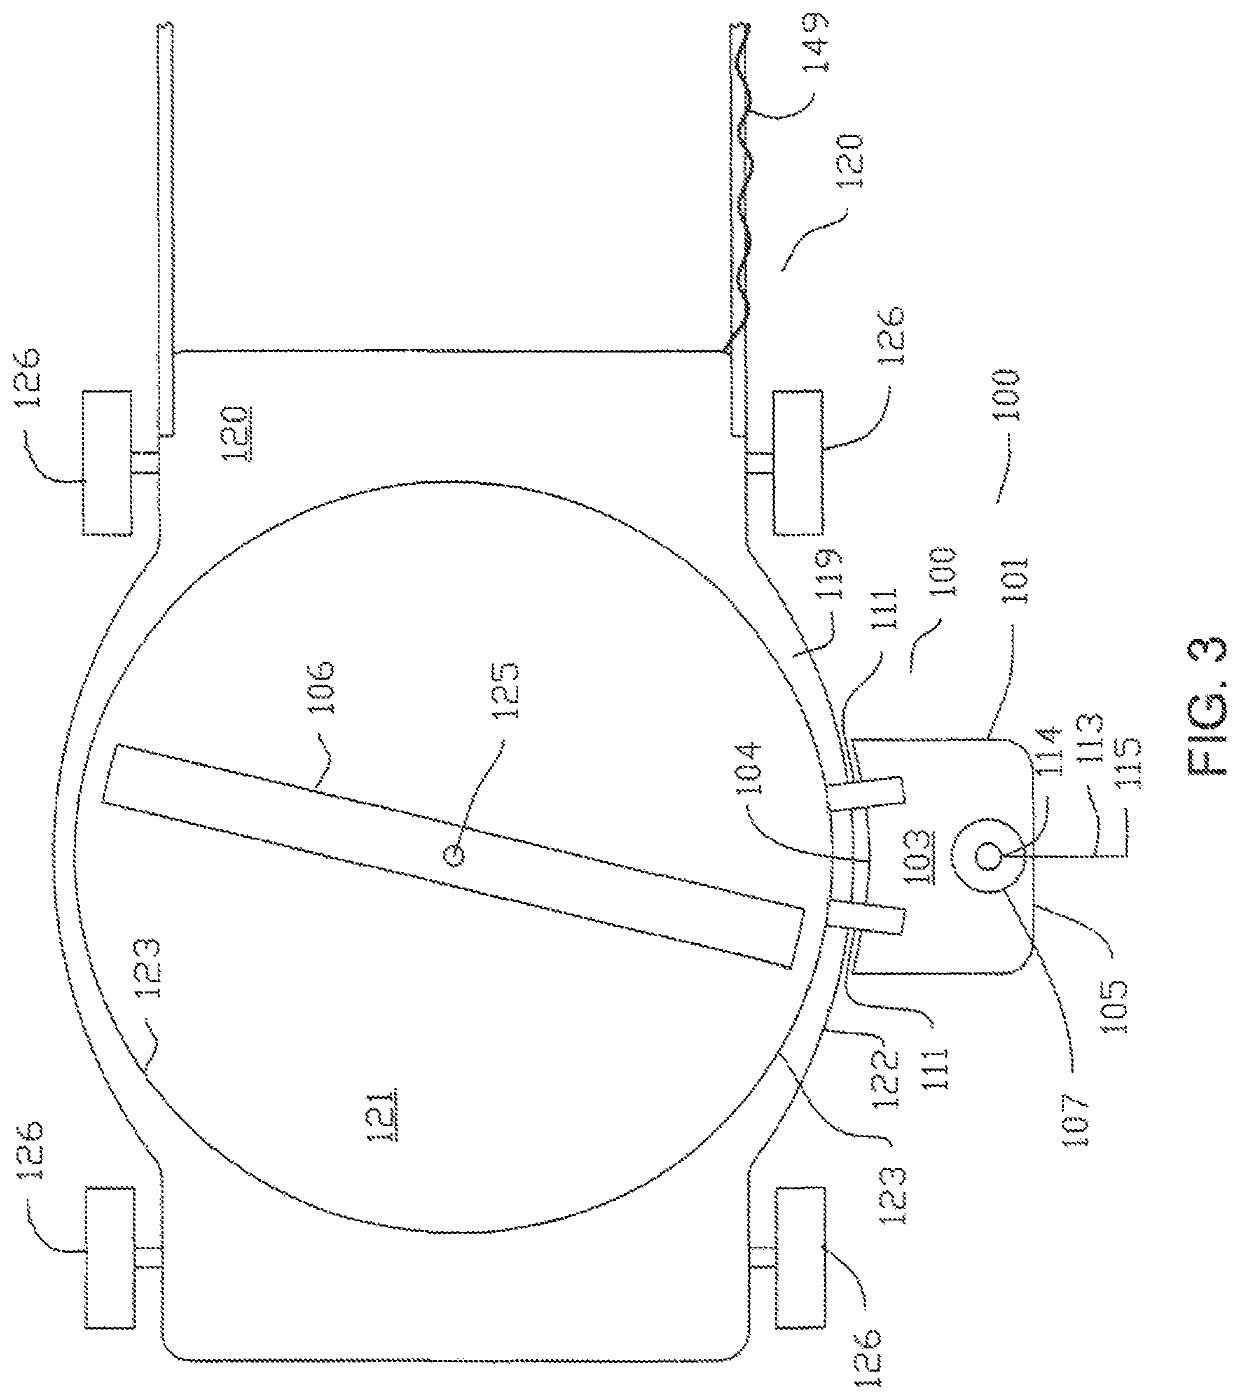 Lawn mower mounted string trimmer attachment apparatus and method